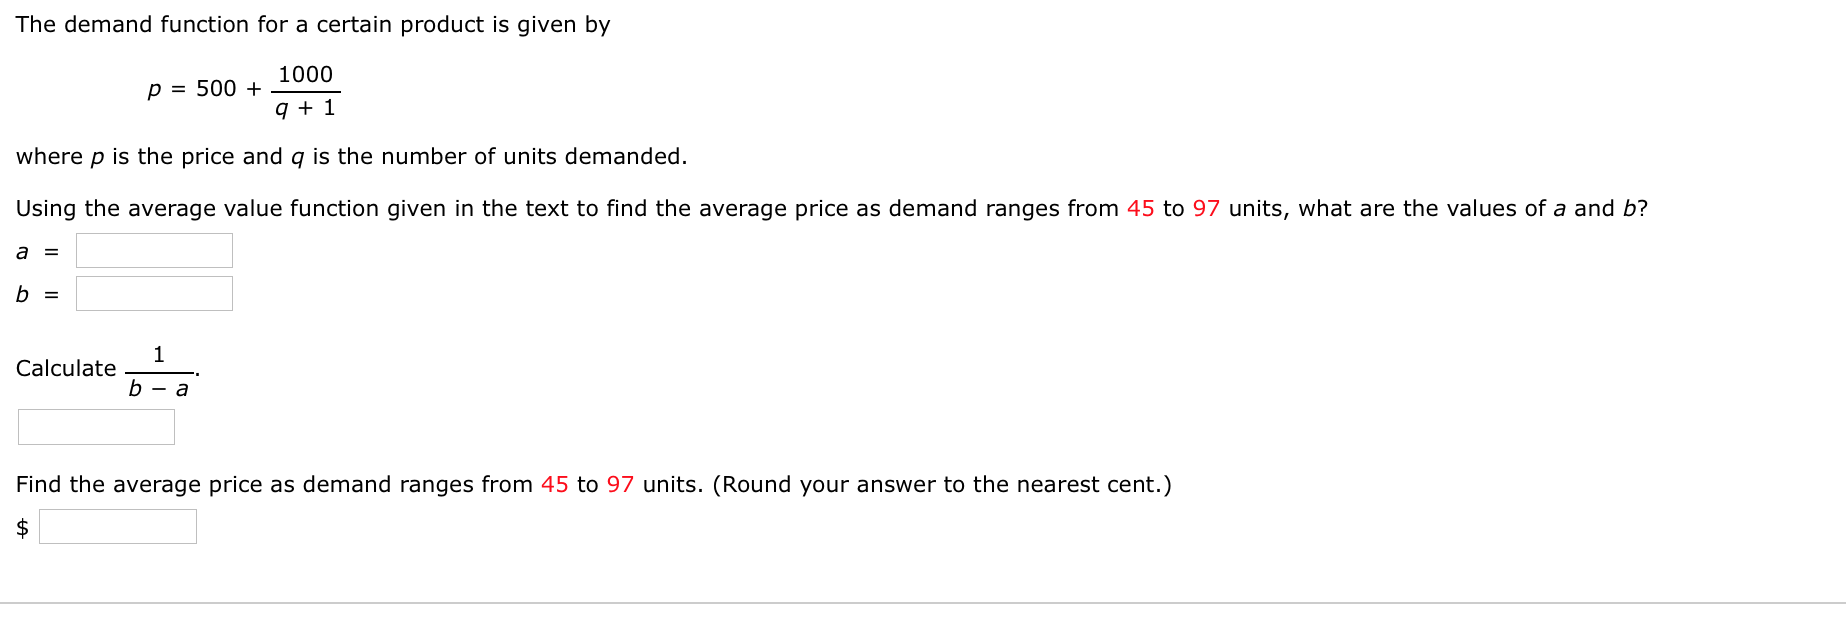 The demand function for a certain product is given by
1000
p = 500 +
q + 1
where p is the price and q is the number of units demanded.
Using the average value function given in the text to find the average price as demand ranges from 45 to 97 units, what are the values of a and b?
